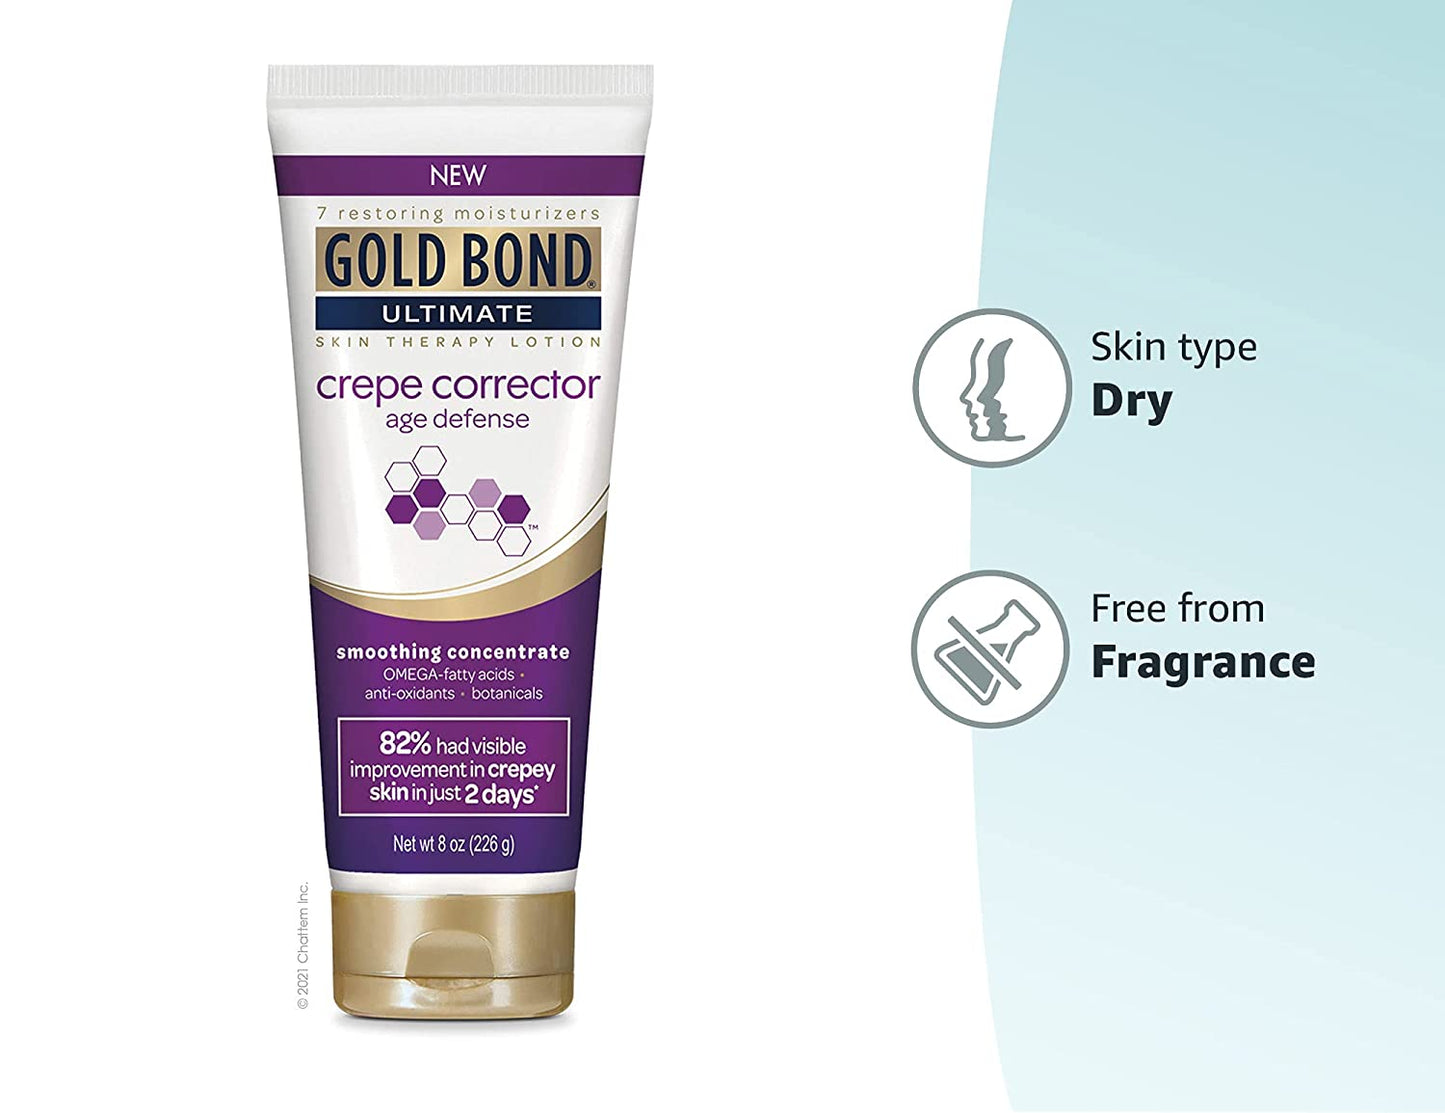 Gold Bond Crepe Corrector Ultimate Age Defense Smoothing Concentrate 8 Oz (226 g)